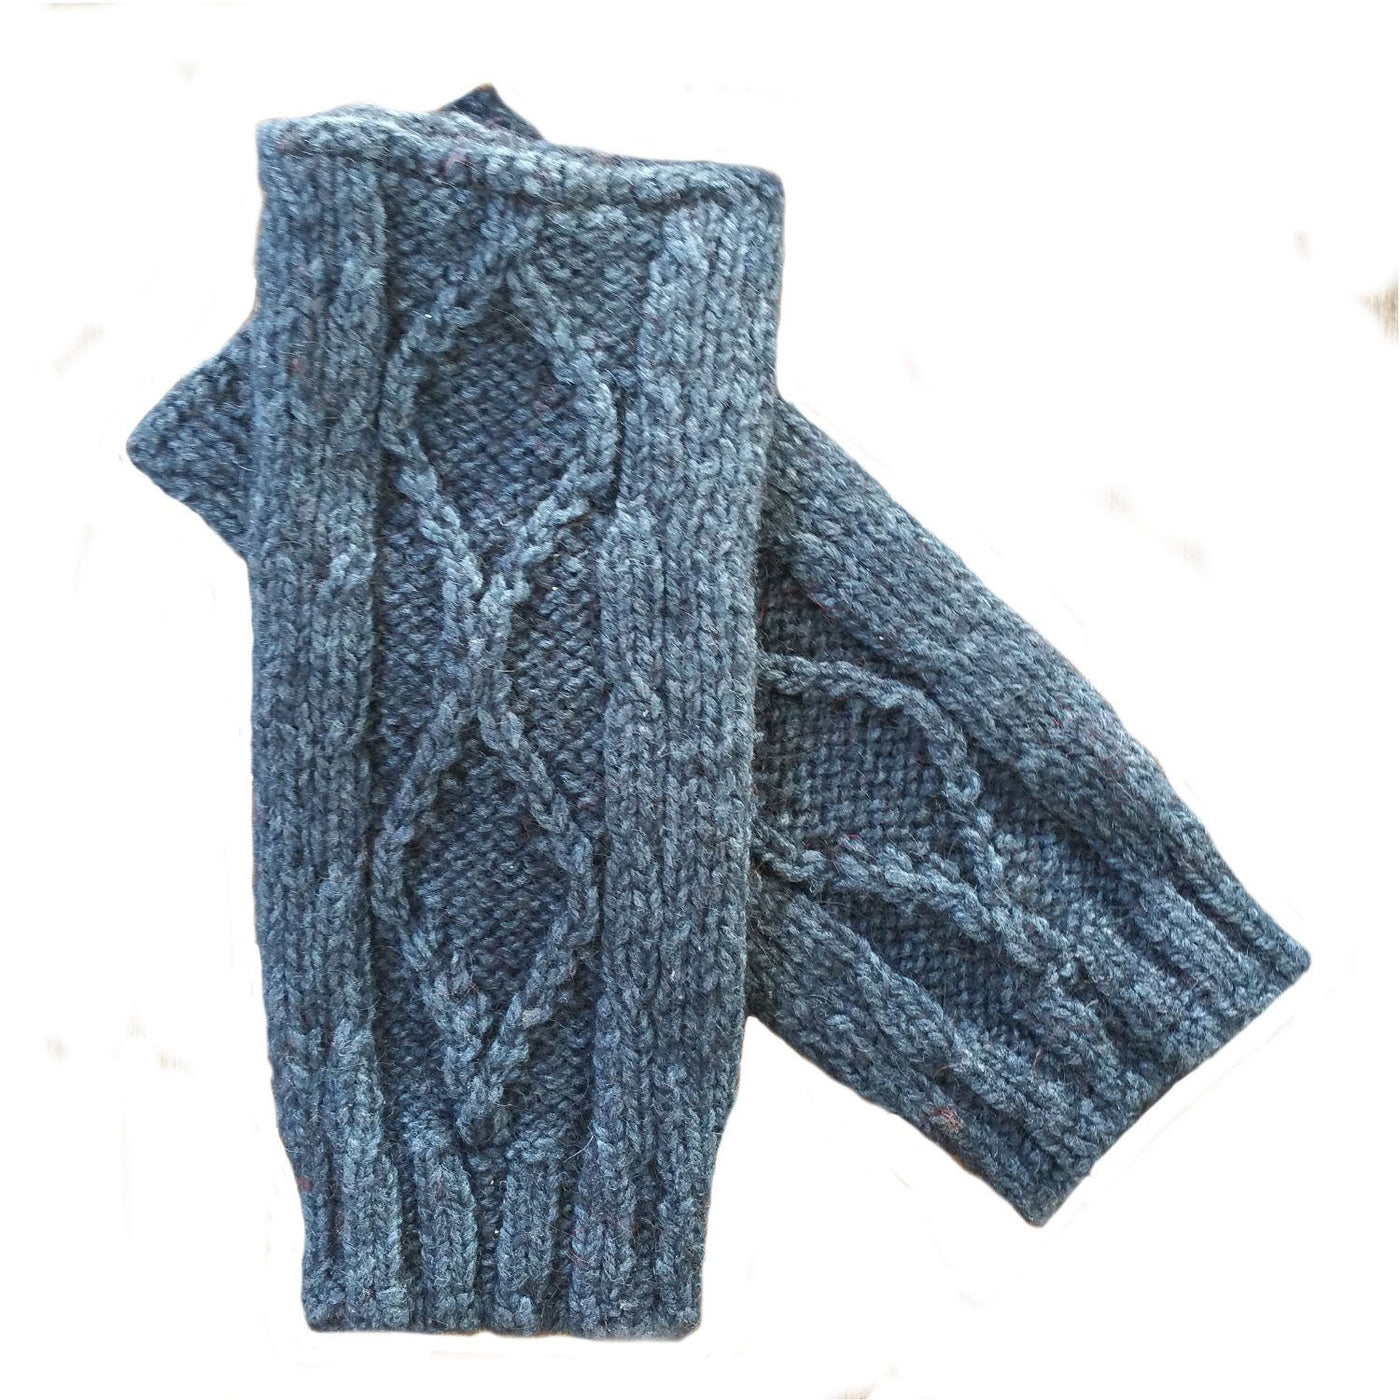 Diamond cabled knitted fingerless gloves Bison Gear The Buffalo Wool Co. Blue 